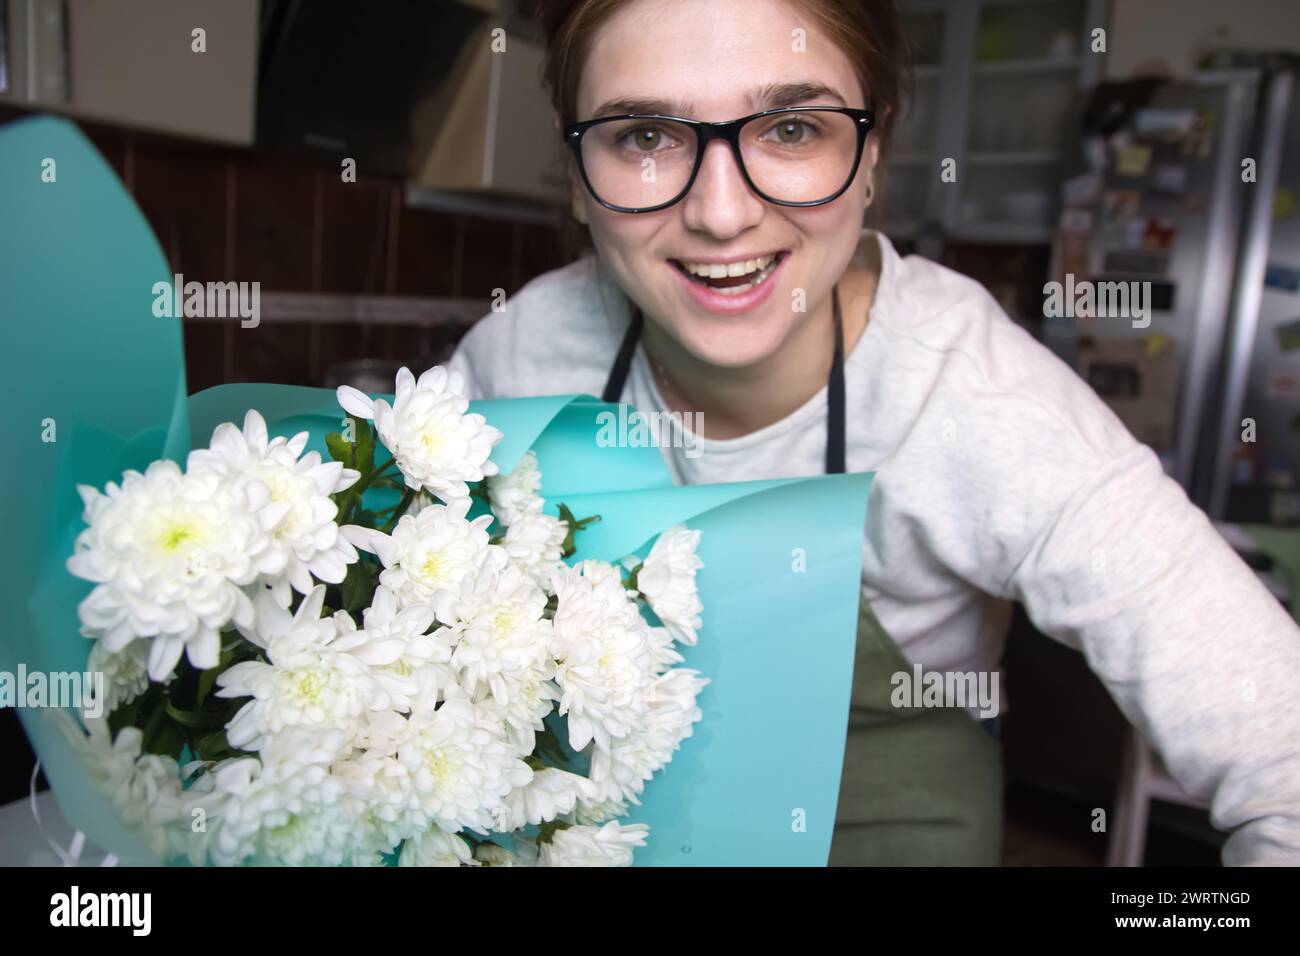 Florist woman smiling holding bouquet with white daisies. This scene captures the artistry of a small business florist in action. Out of focus. Stock Photo